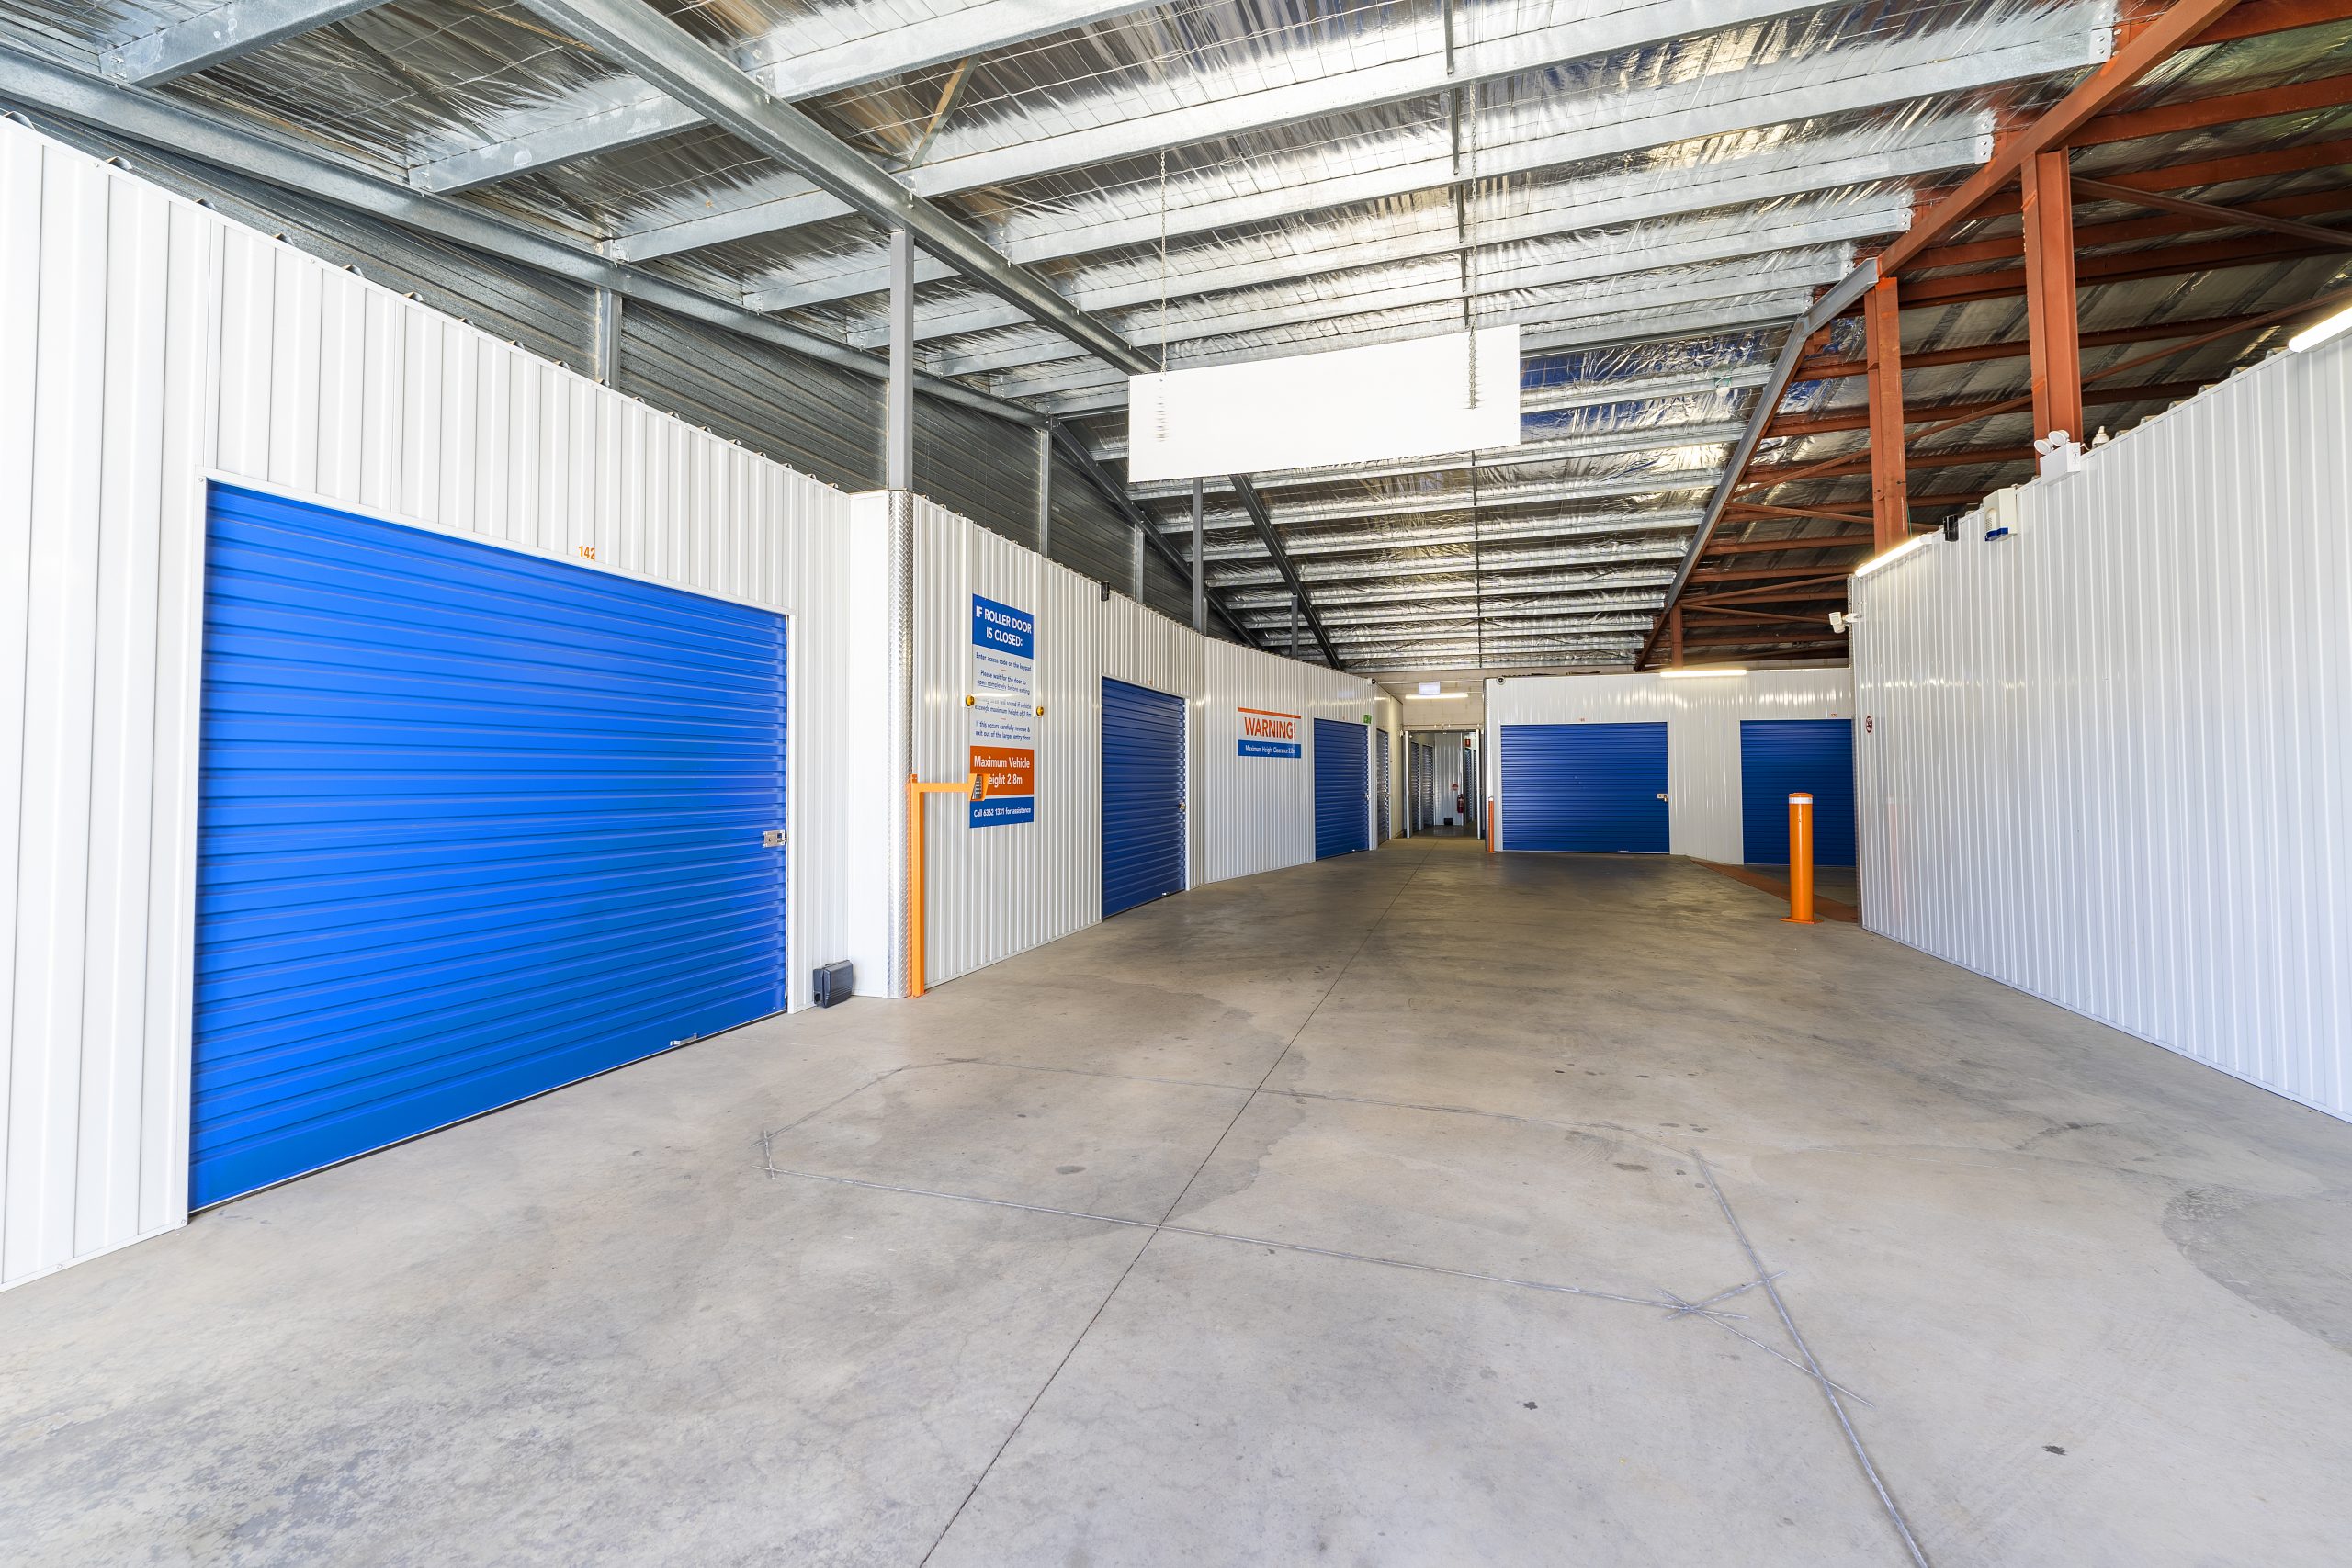 West Orange Self Storage: Clean and secure self storage, On-site manager, Drive-thru Loading, Large Range of Shed Sizes - WOSS is your self storage solution in Orange NSW.